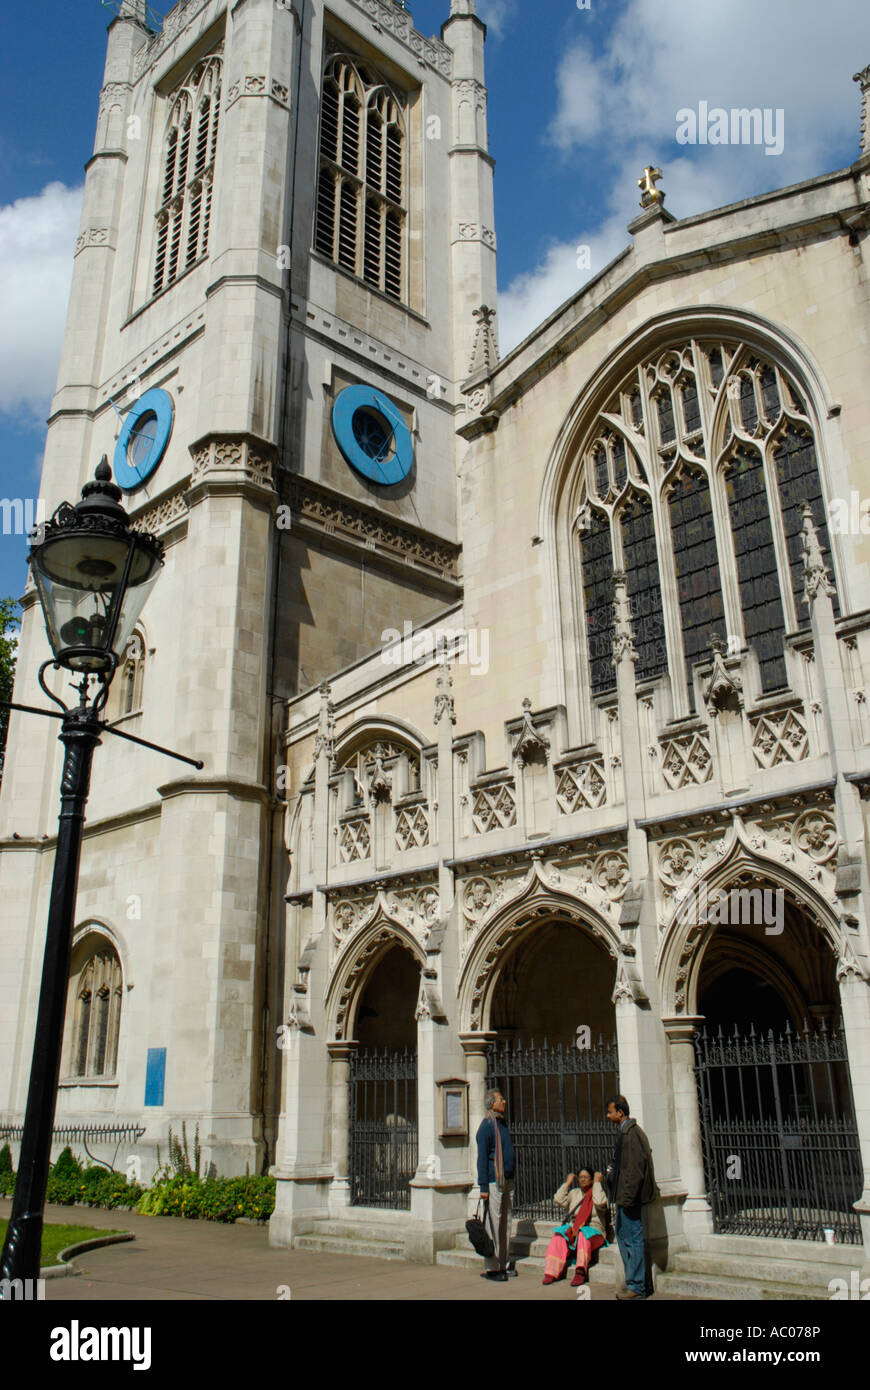 Exterior view of Saint Margaret's Church Westminster London England Stock Photo